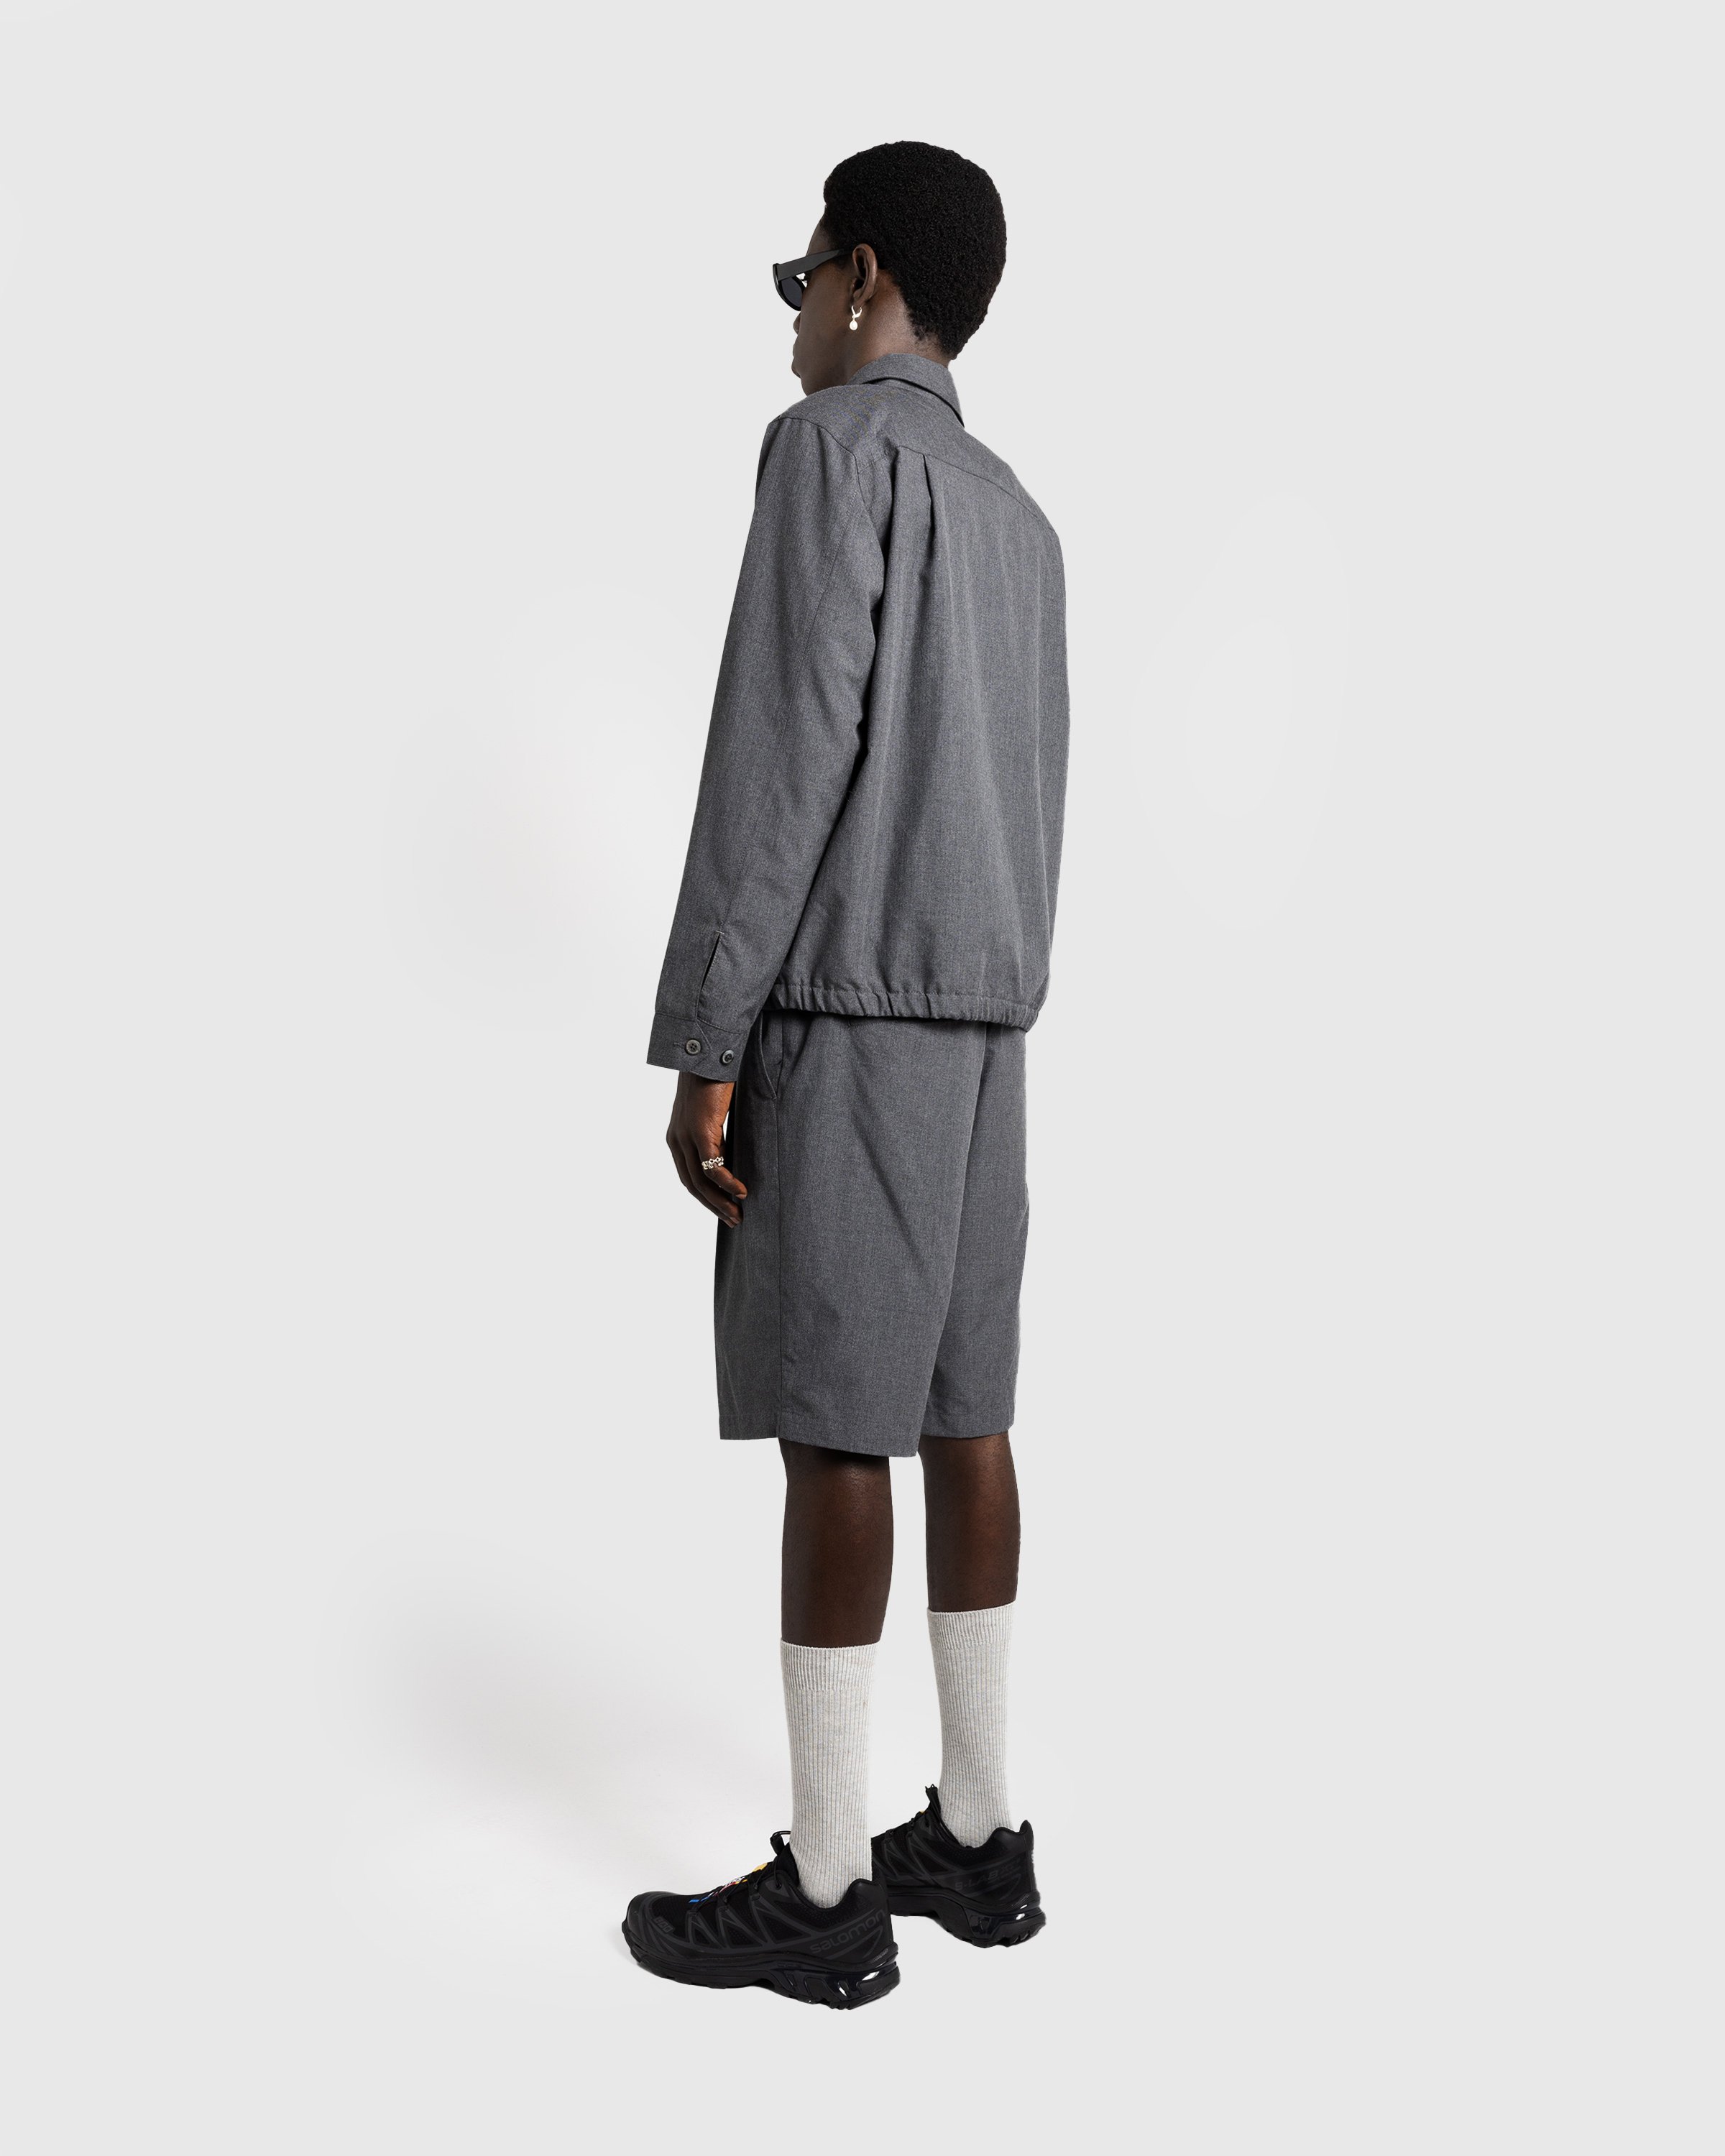 Highsnobiety HS05 - Tropical Suiting Shorts - Clothing - Grey - Image 6